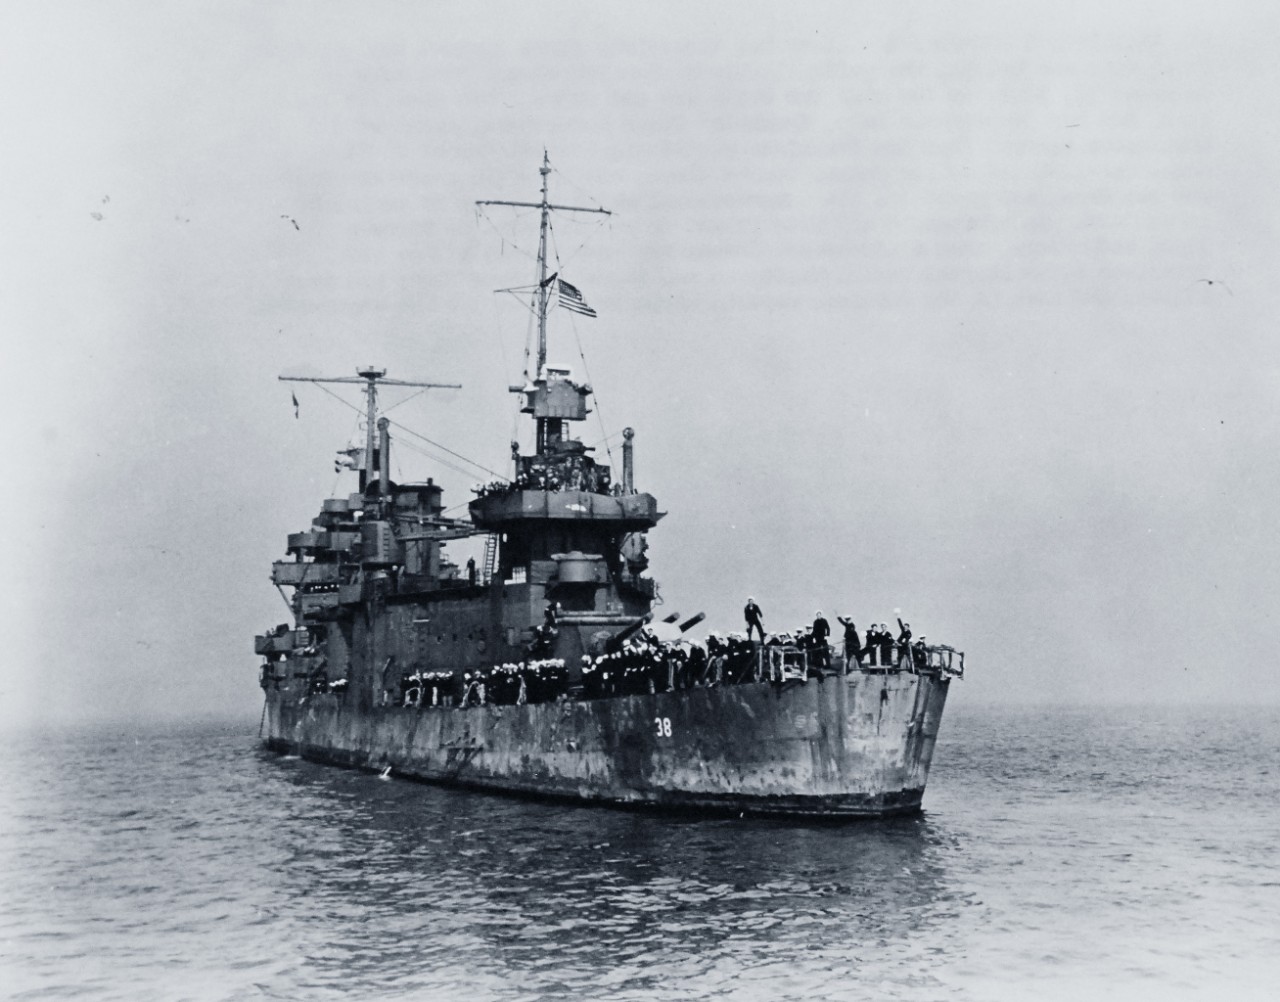 <p>80-G-40250: USS San Francisco (CA 38) shown after her fight against the Japanese in the epic sea battle, Naval Battle of Guadalcanal, November 12-15, 1942. She arrived in her namesake city for repairs on December 12, 1942. She was en route to the Mare Island Navy Yard.&nbsp;</p>
